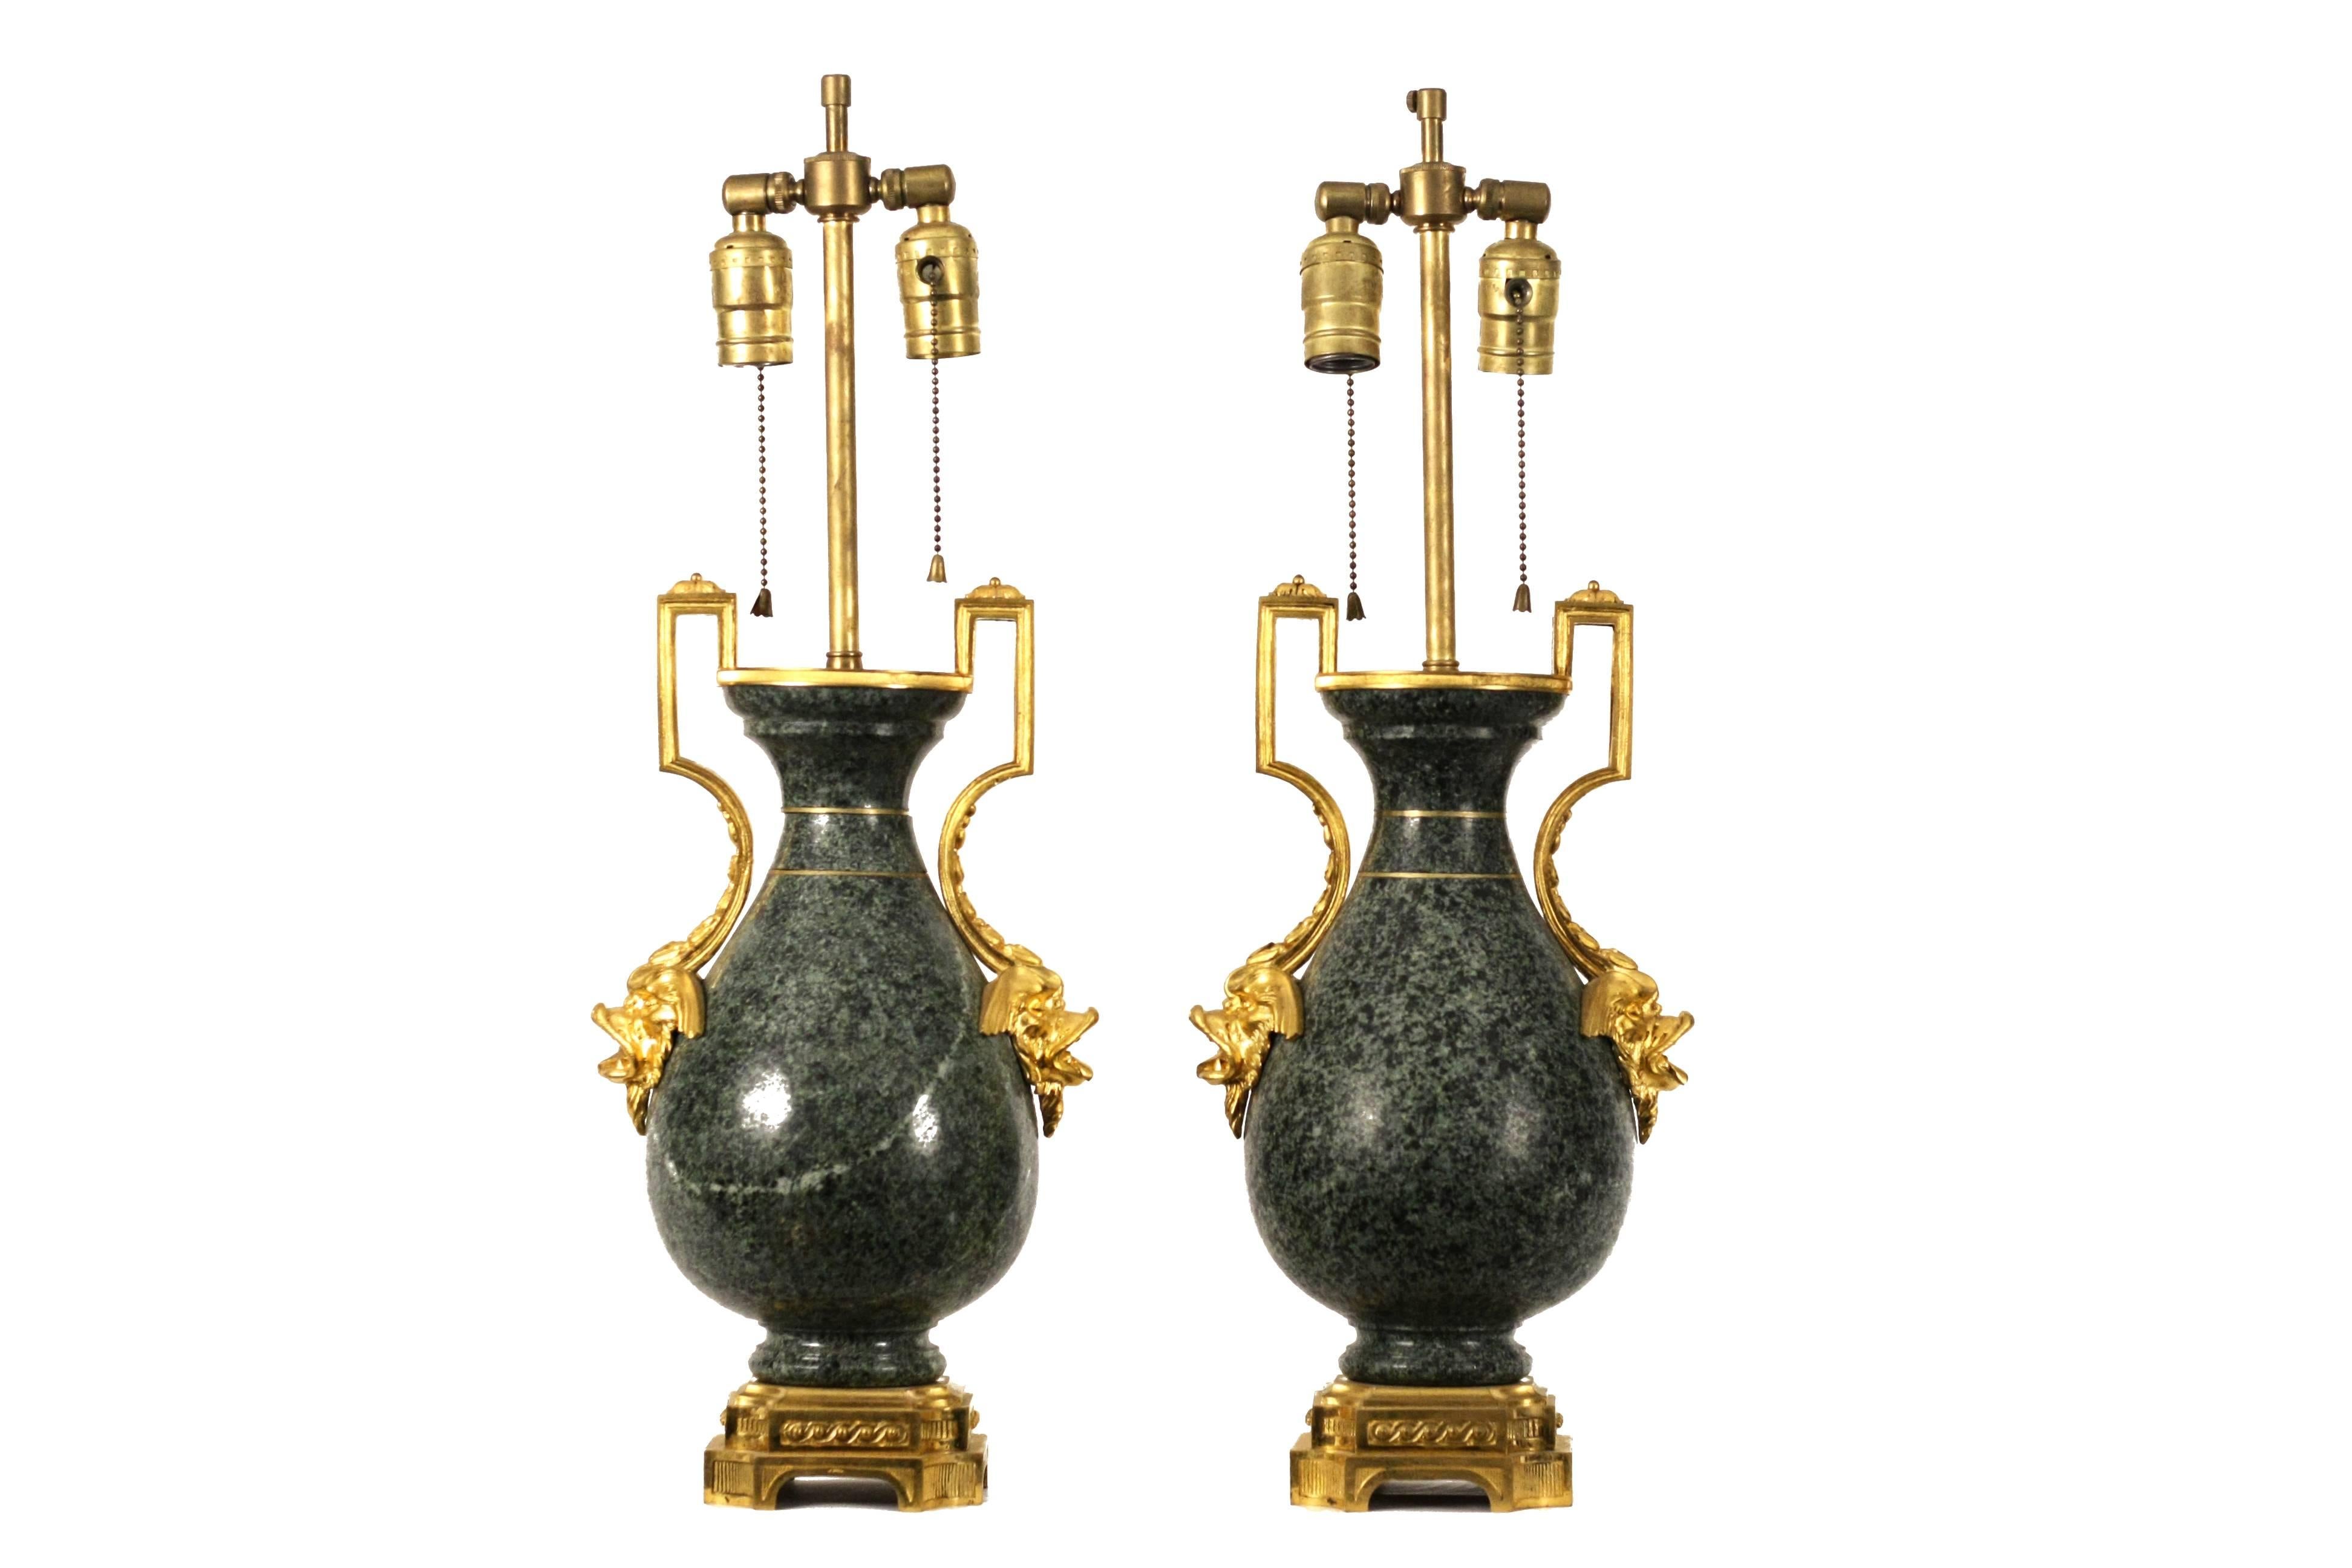 French Pair of 19th Century Ormolu-Mounted Granite Vases For Sale